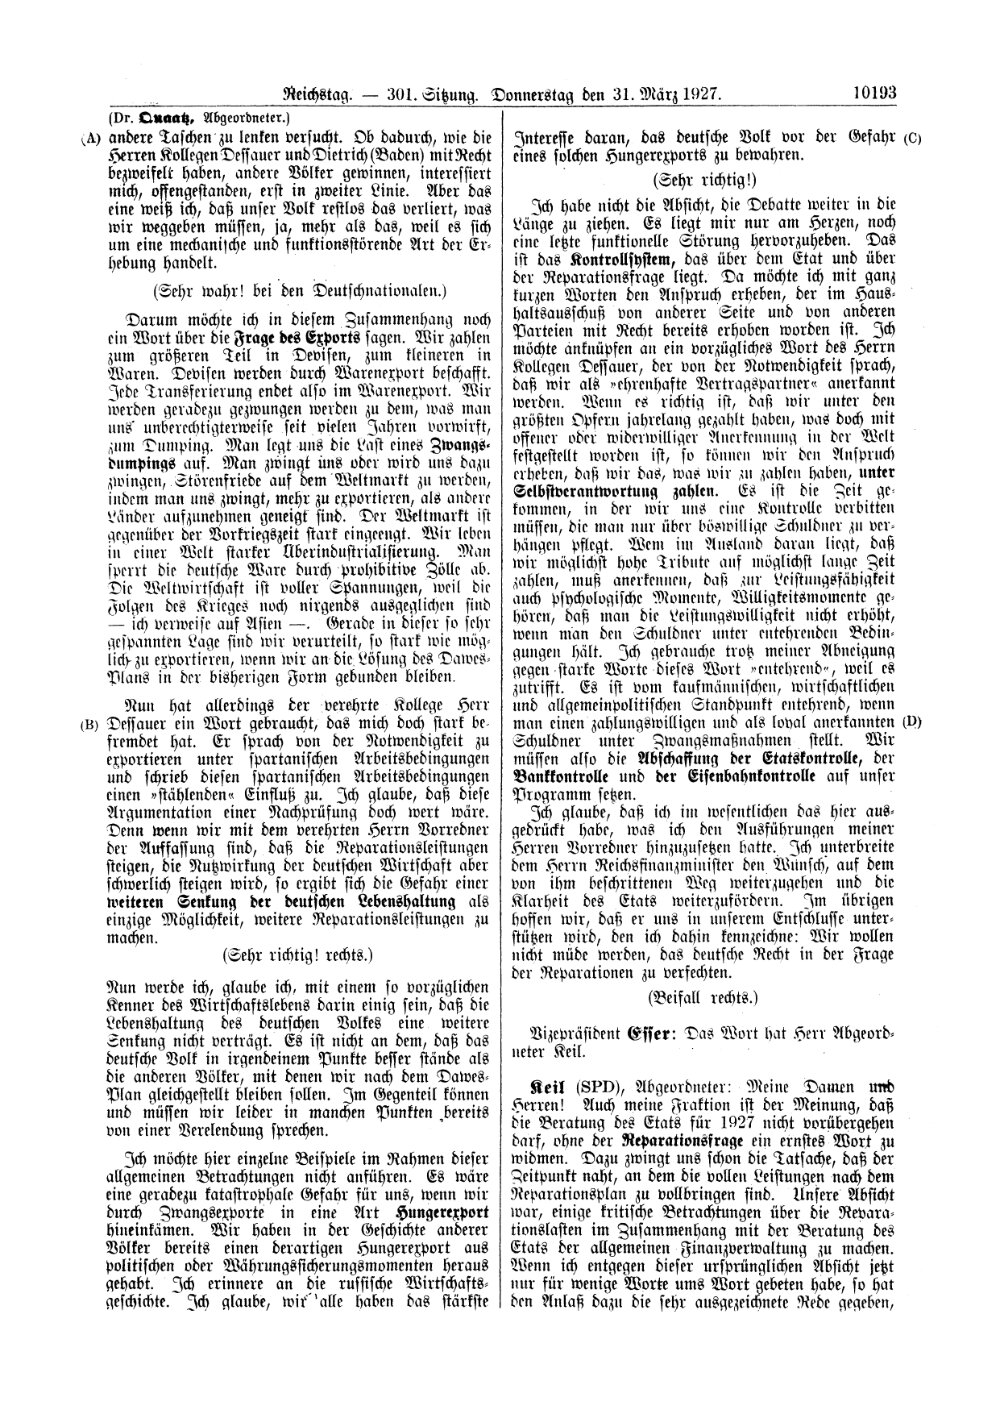 Scan of page 10193